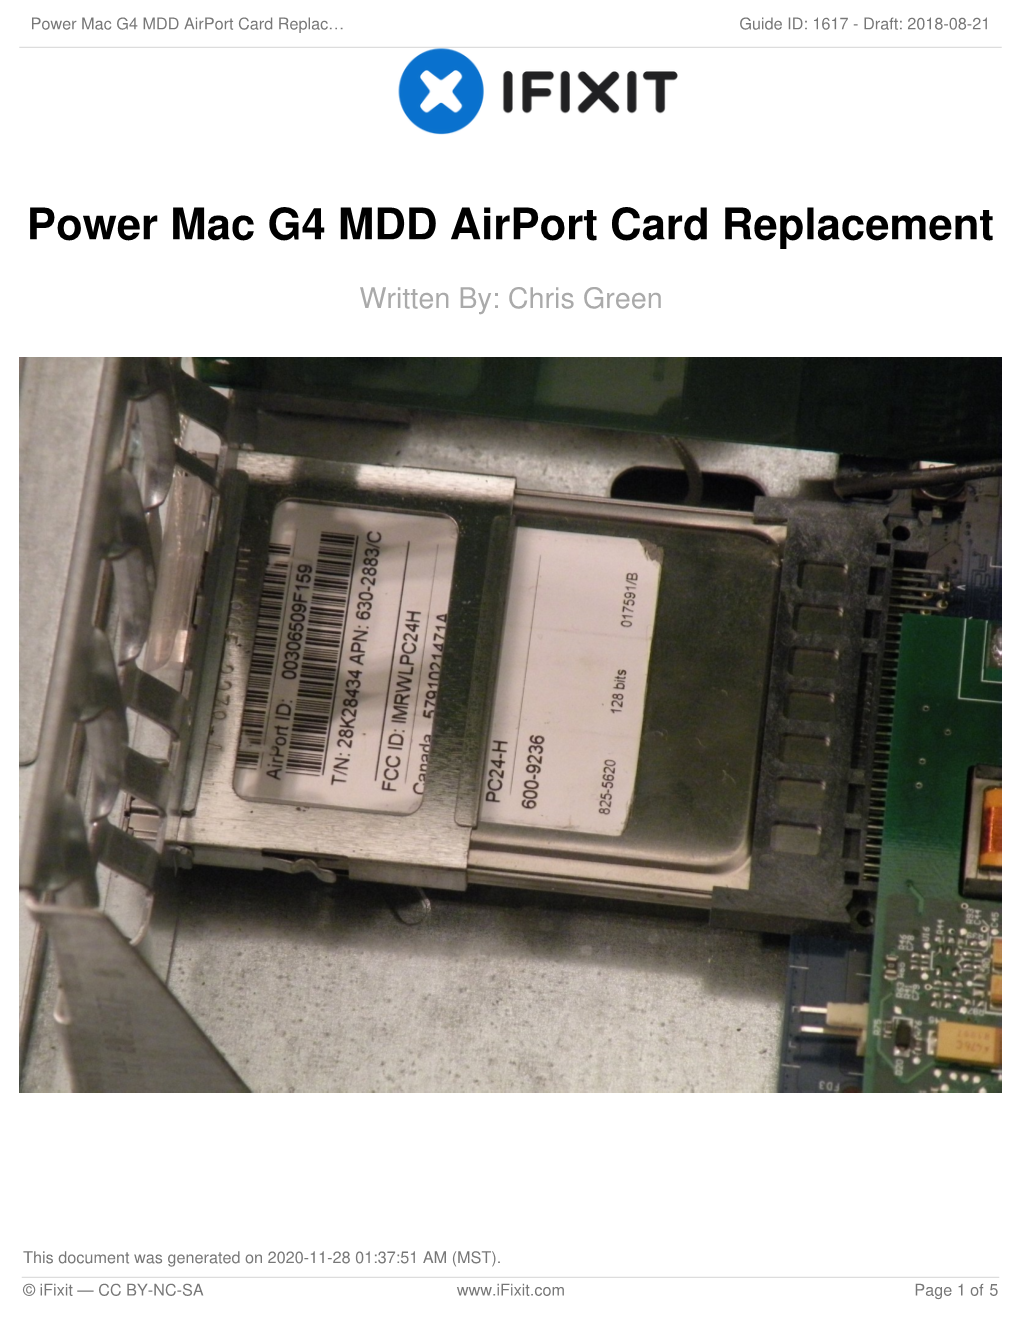 Power Mac G4 MDD Airport Card Replacement